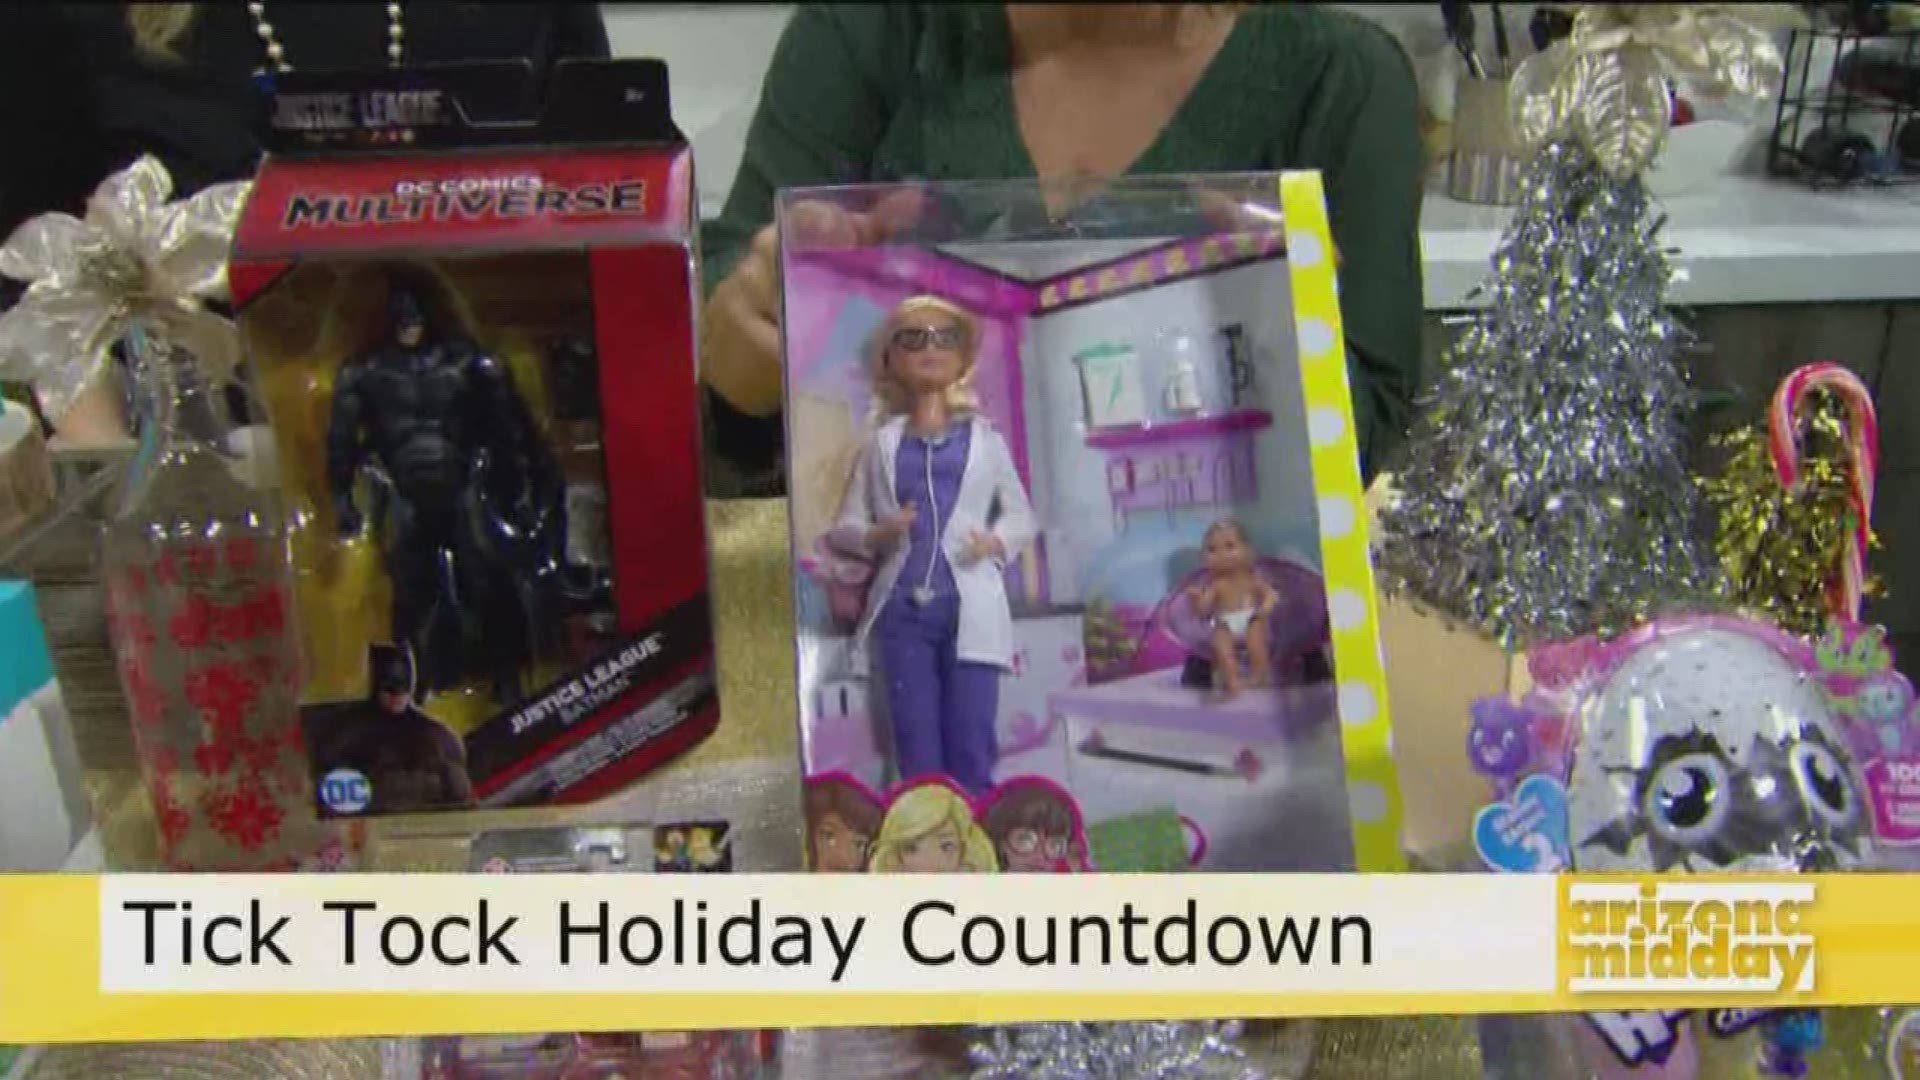 Beauty & LifeStyle expert Dawn McCarthy has a look at some of the gifts your family will love this holiday season!